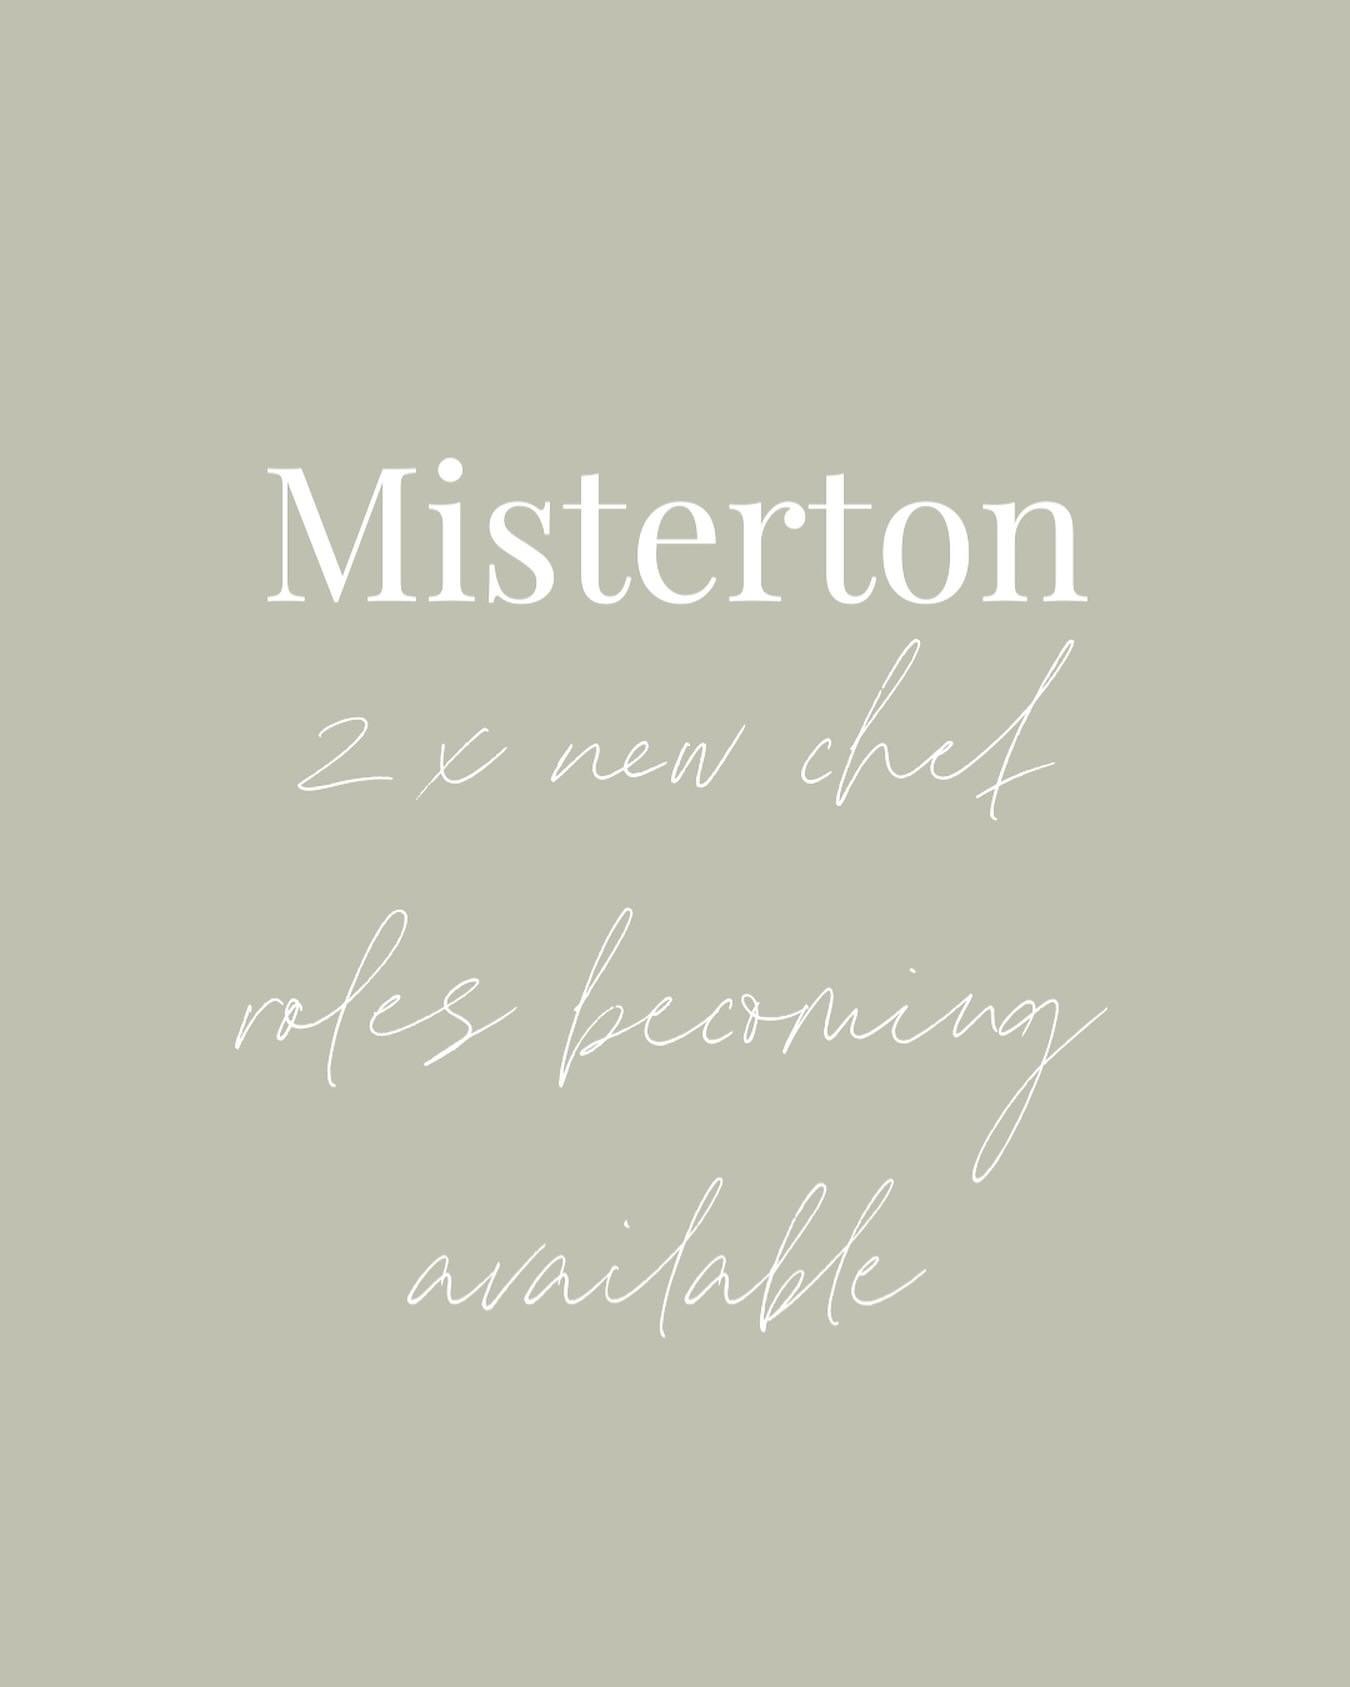 As two or our Misterton team will be relocating to join the new team in Bawtry, we have two chef roles becoming available in Misterton. 

We have some exciting plans coming for our Misterton location and we&rsquo;re looking for positive, passionate a